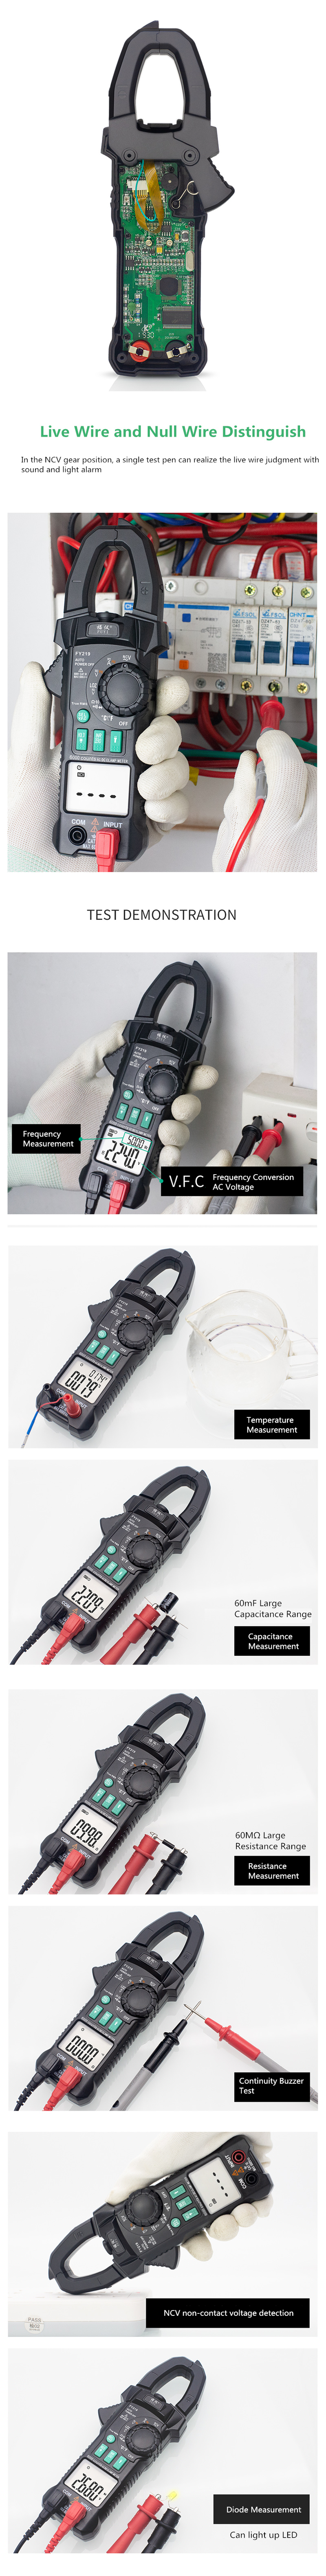 FUYI-FY219-Double-Display-ACDC-True-RMS-Digital-Clamp-Meter-Portable-Multimeter-Voltage-Current-Mete-1954245-3